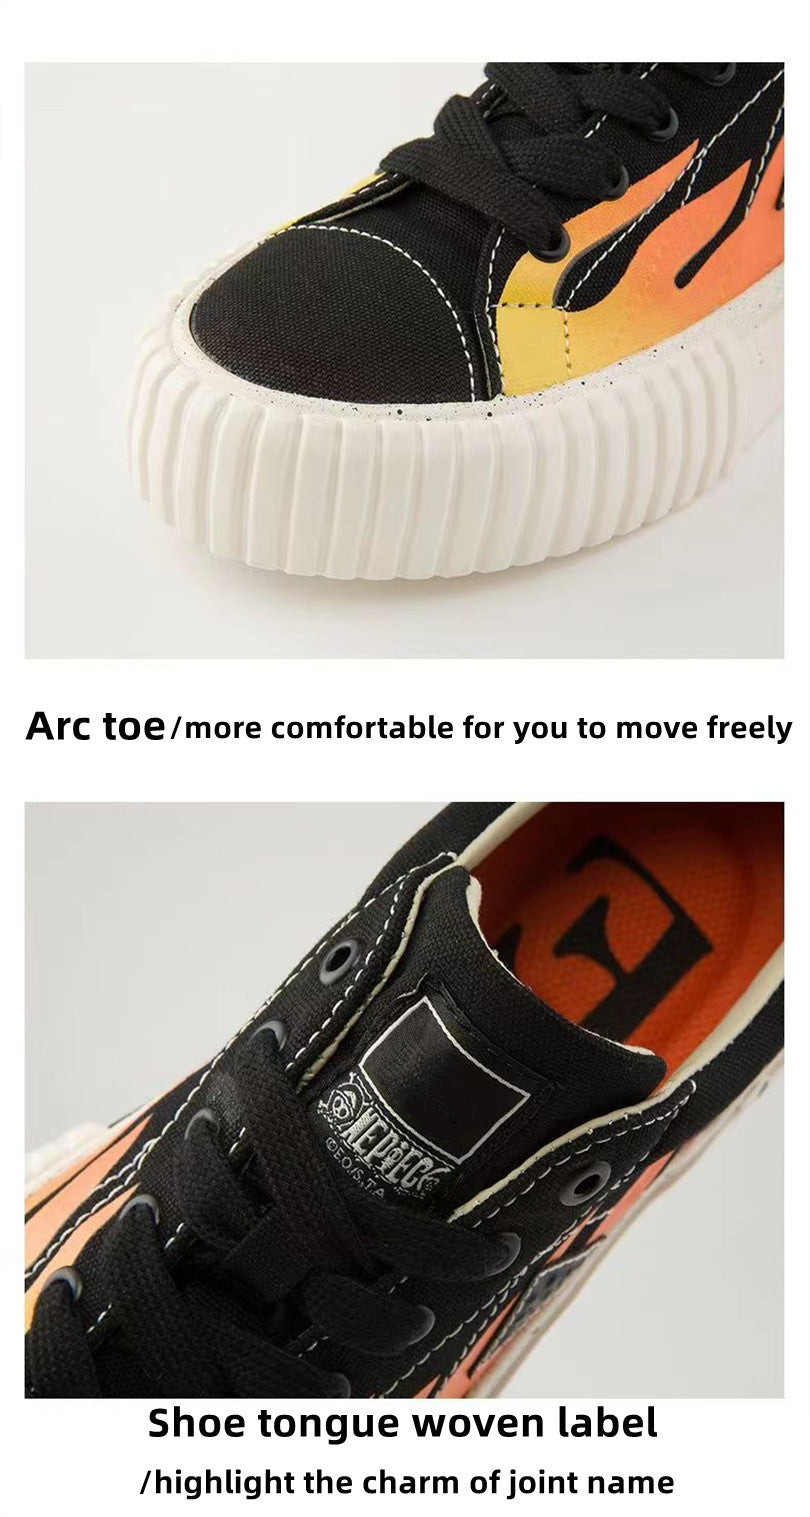 Ace kapa comfortable Canvas shoes Sports shoes（The size of this style is US, please confirm the length of the foot and refer to the size specification, if you need other sizes, please contact customer service）